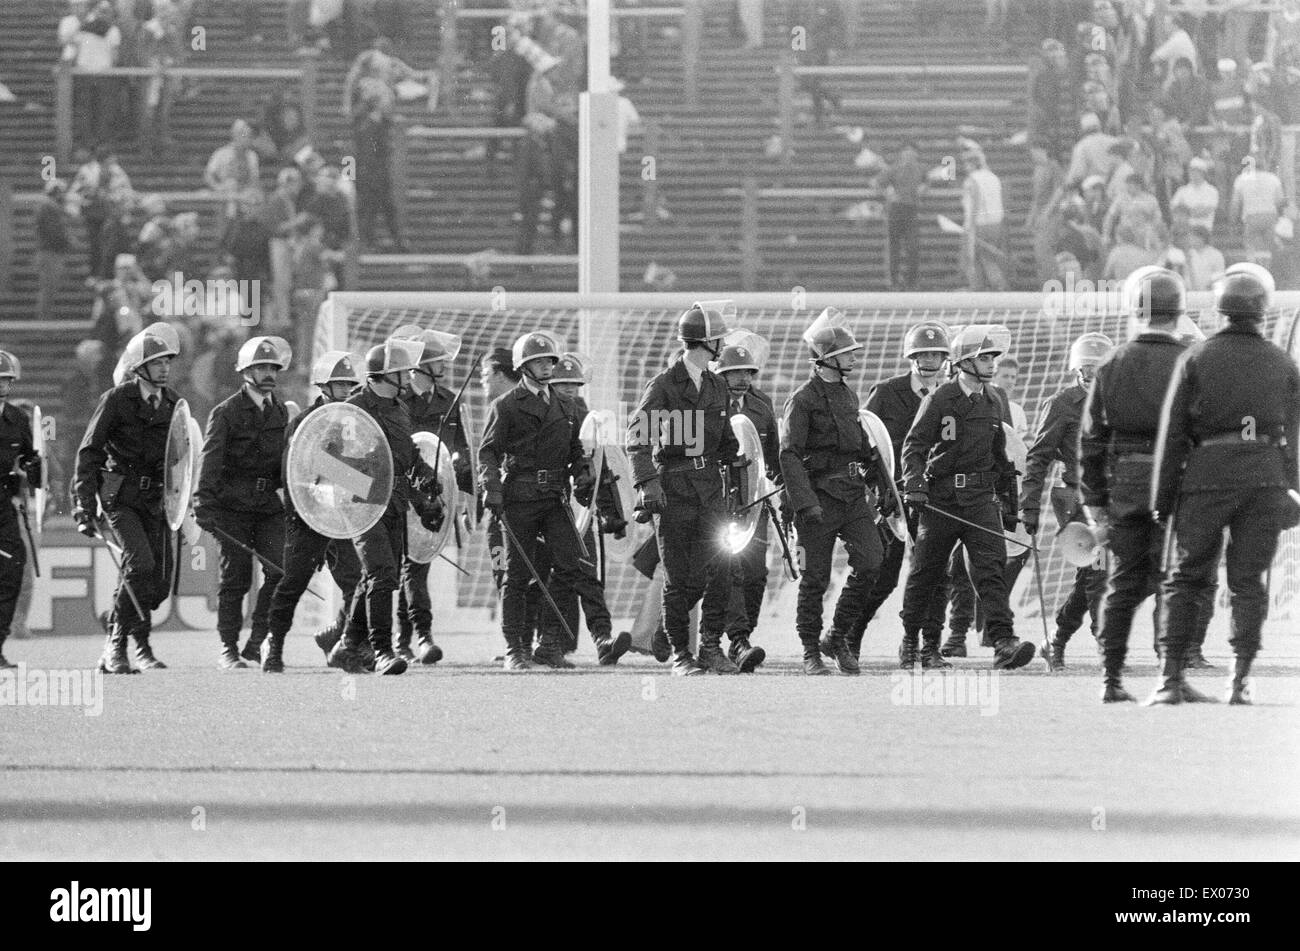 Juventus 1-0 Liverpool, 1985 European Cup Final, Heysel Stadium, Brussels, Wednesday 29th May 1985. Crowd Violence. Stock Photo